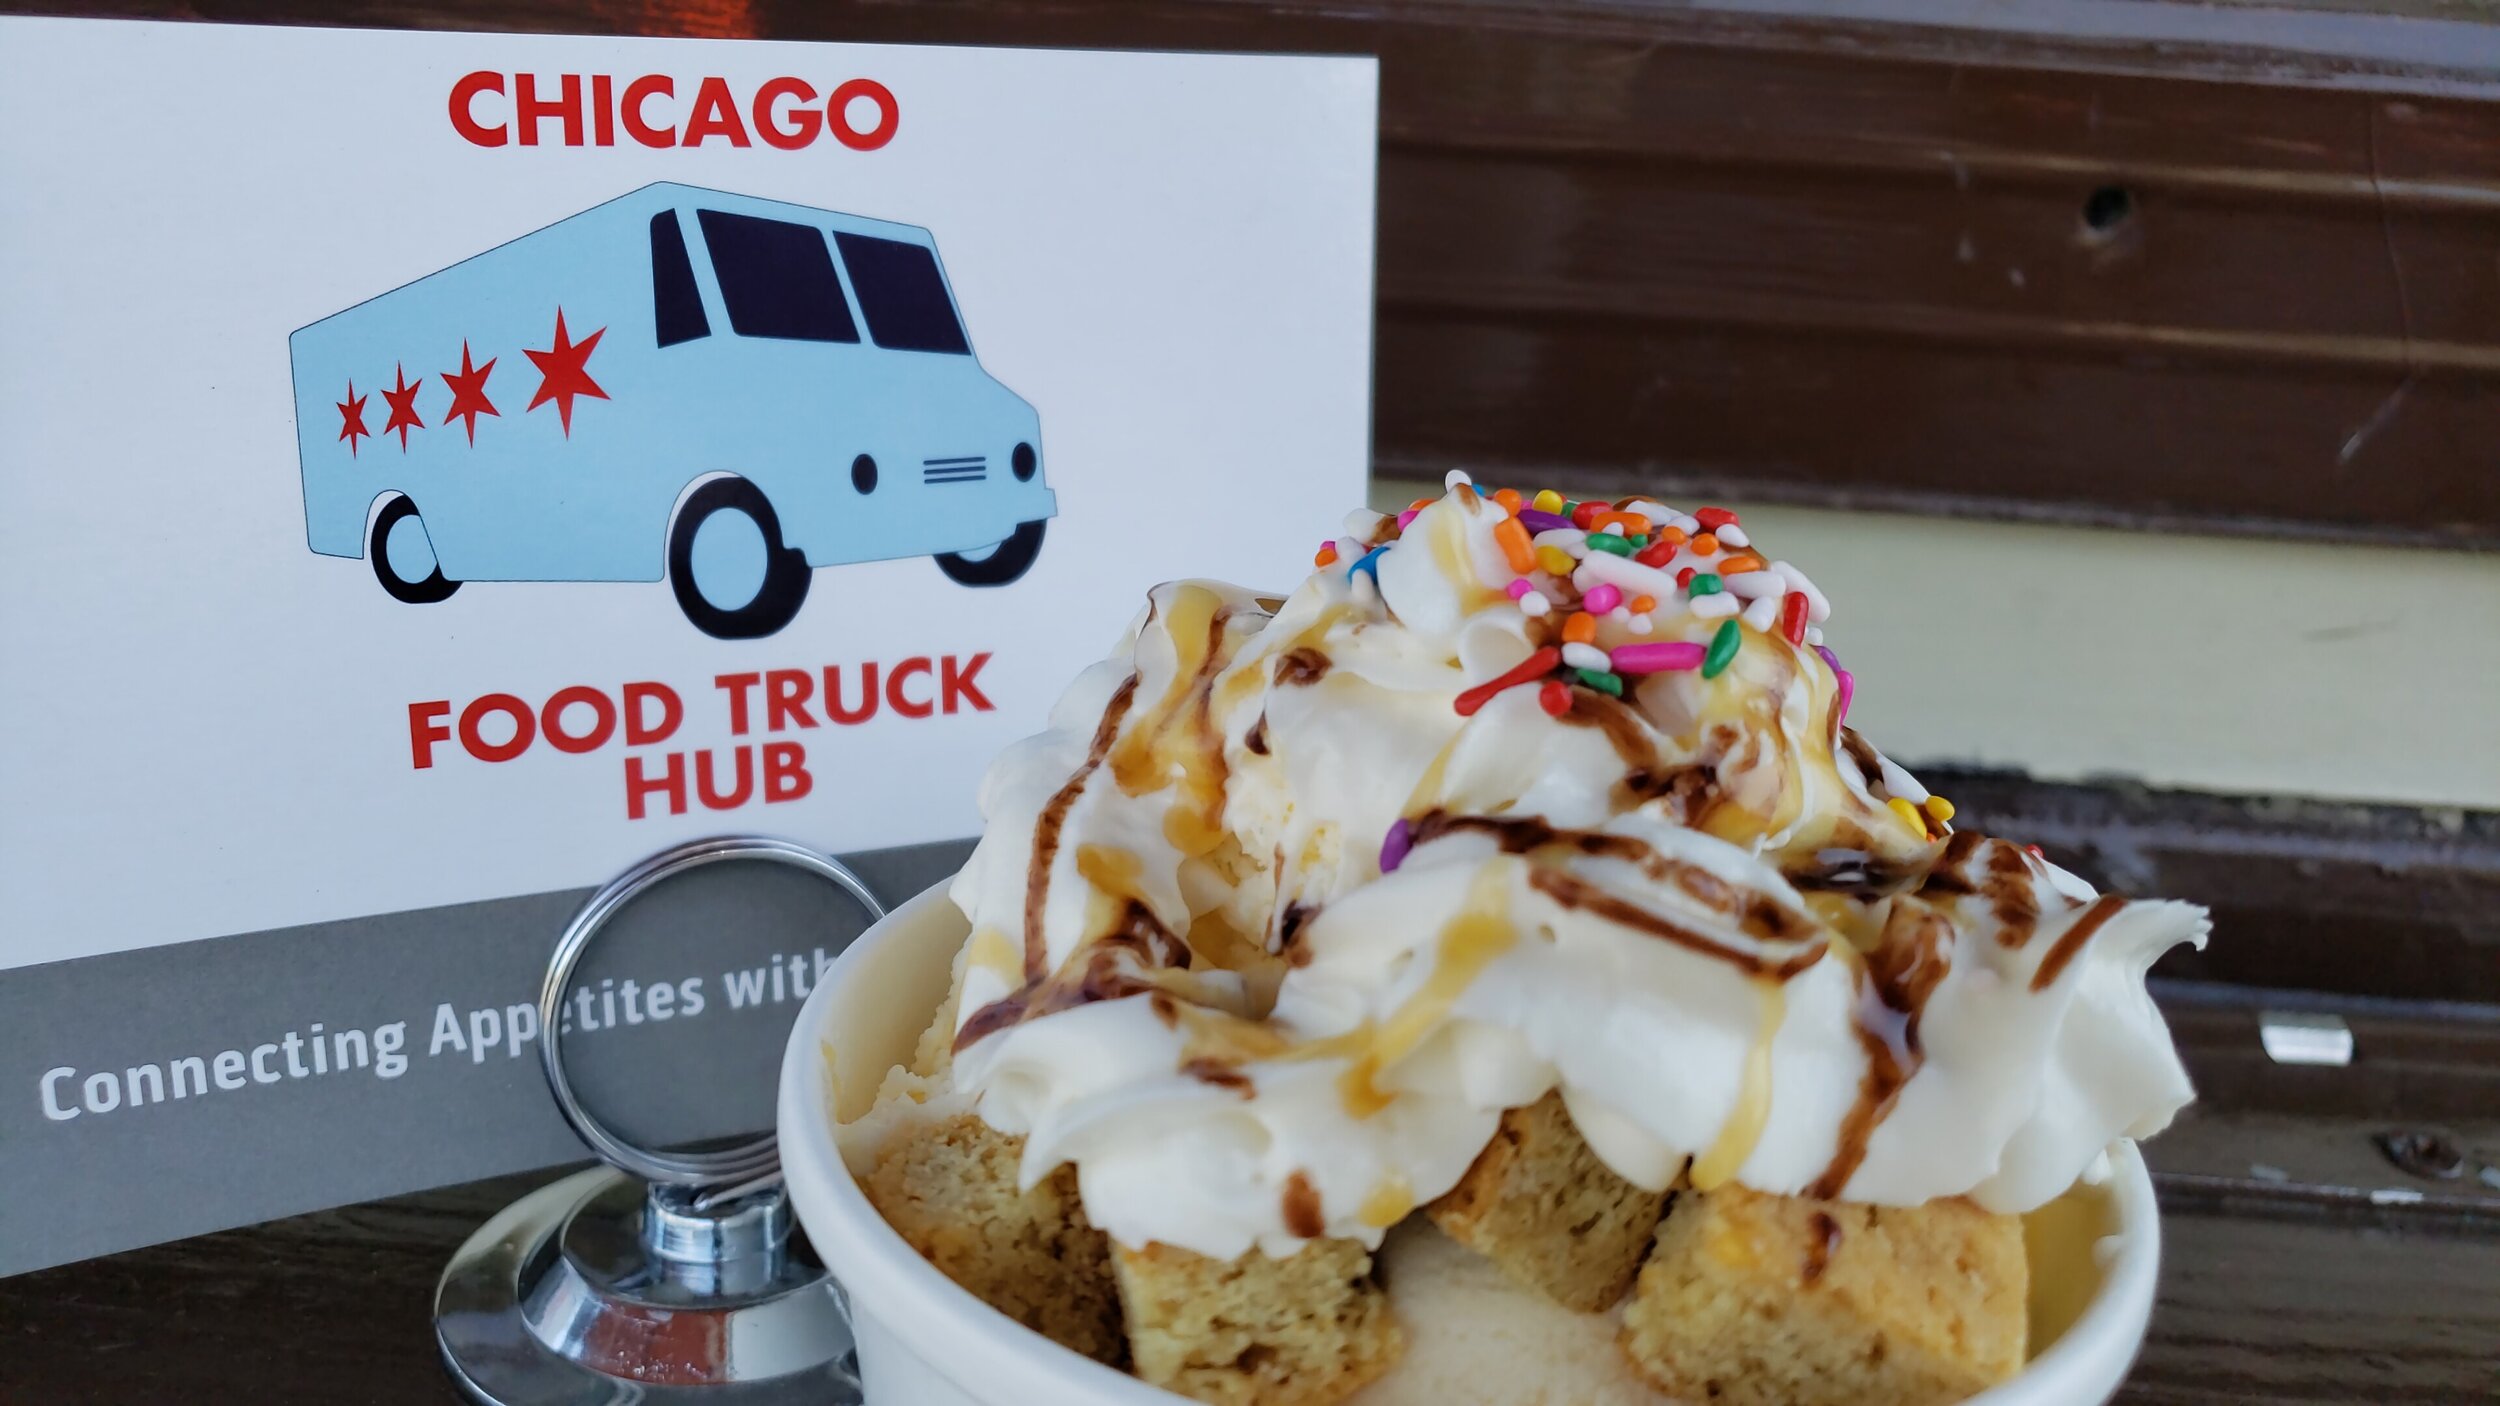 Chicago Food Truck Hub - Ice Cream Bowl With Toppings.jpeg